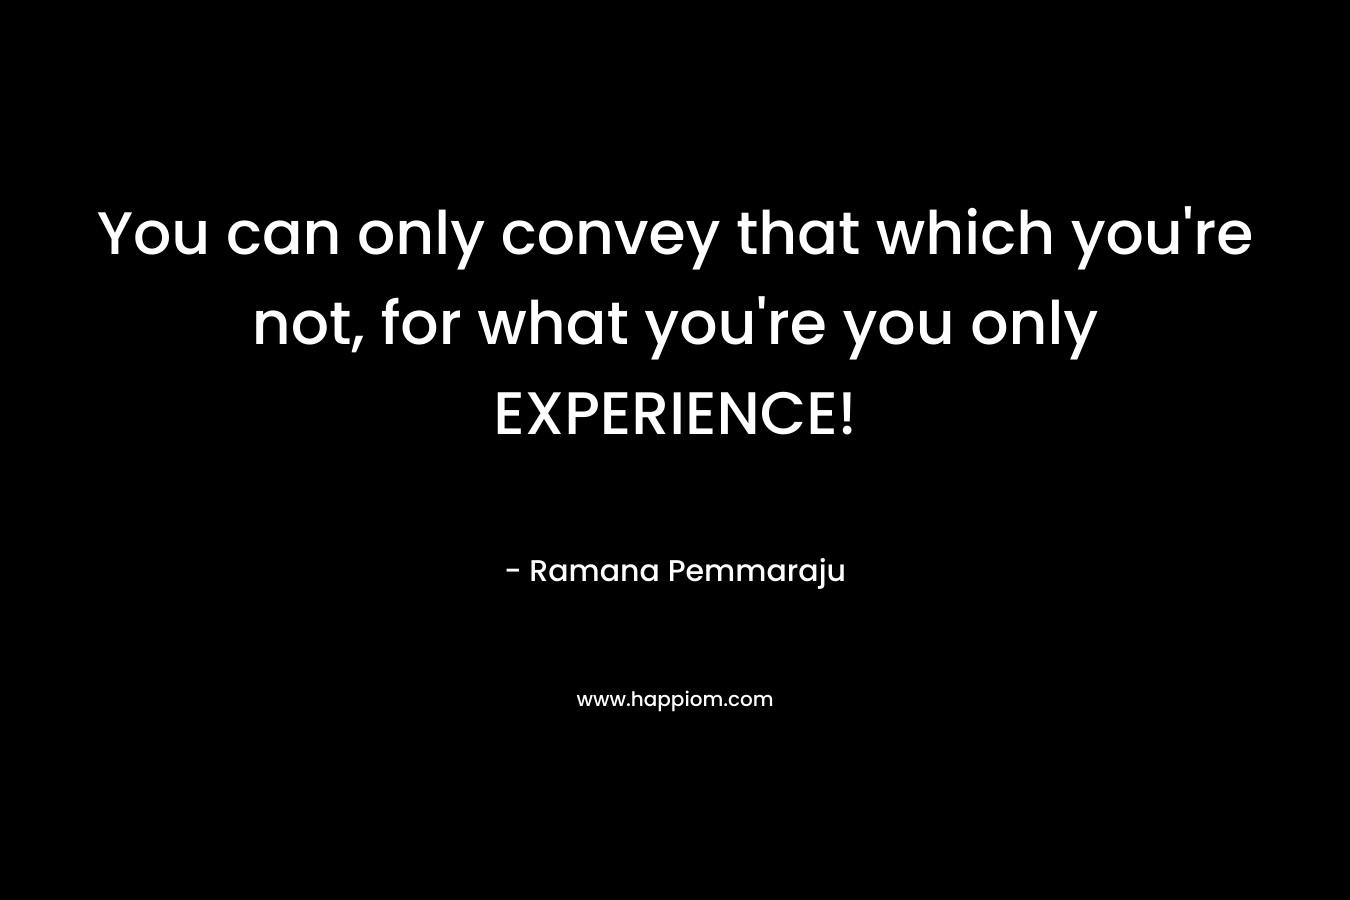 You can only convey that which you're not, for what you're you only EXPERIENCE!